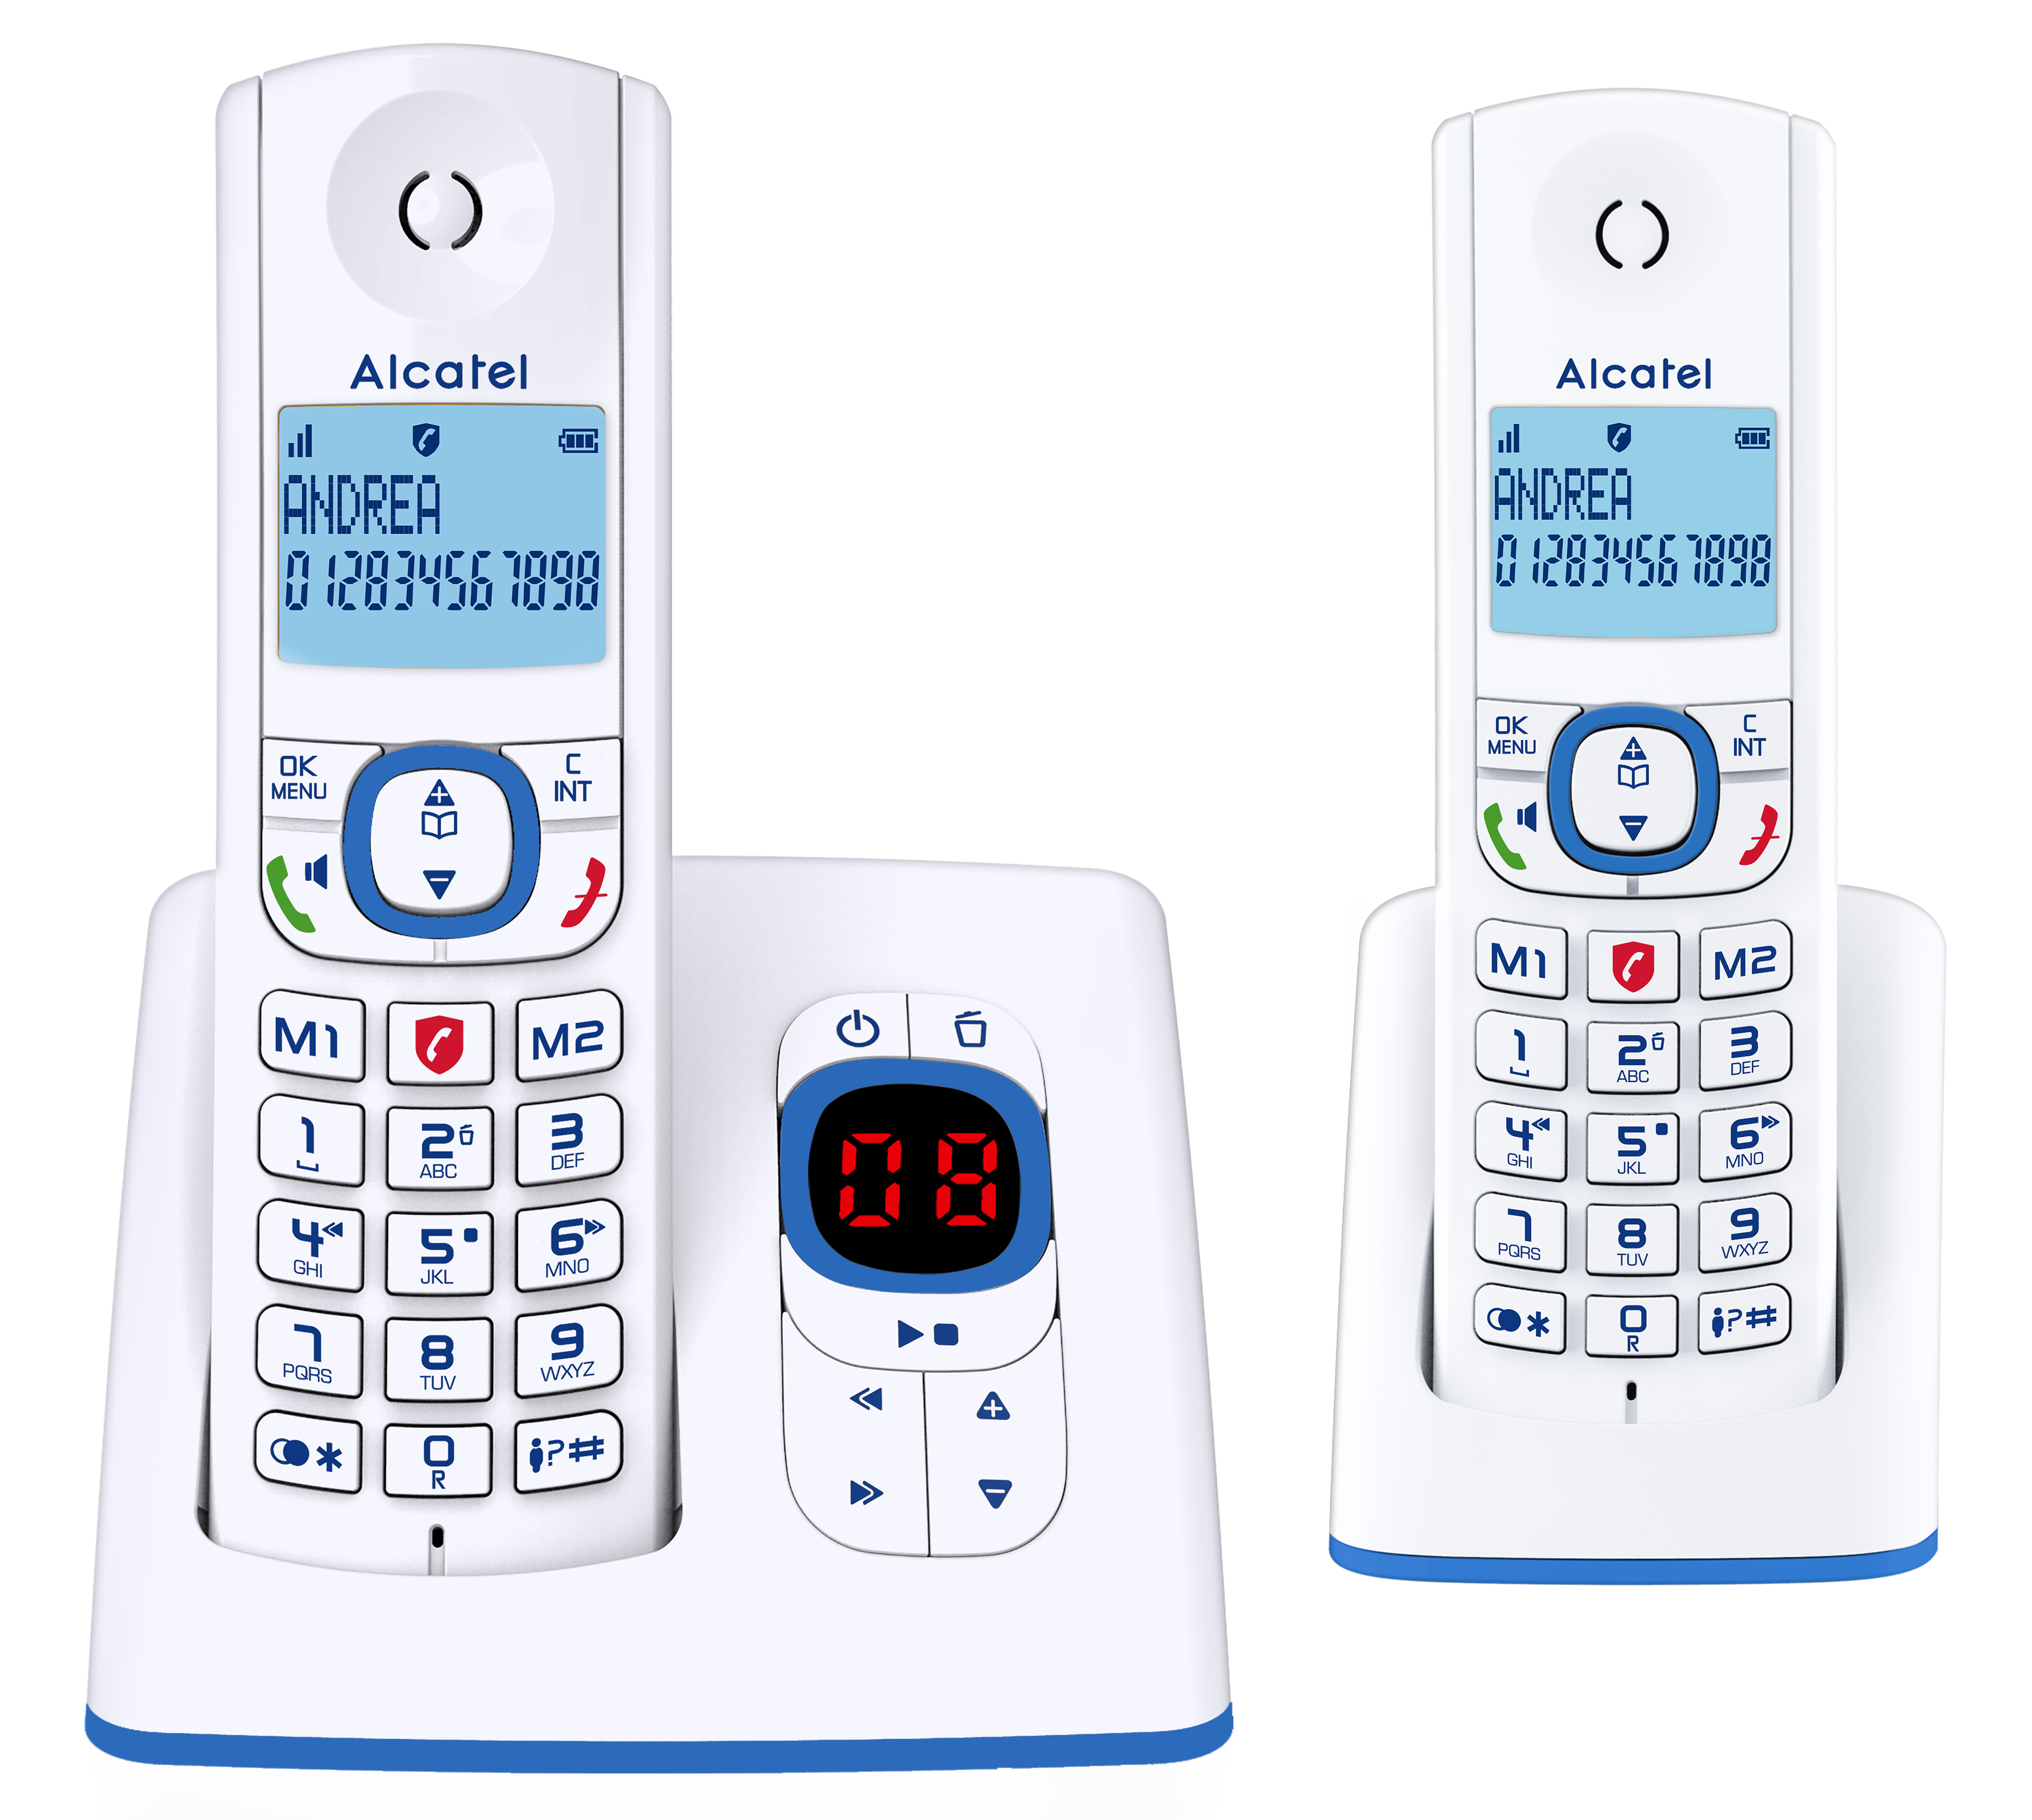 Alcatel F530 answerphone with EASY CALL BLOCK